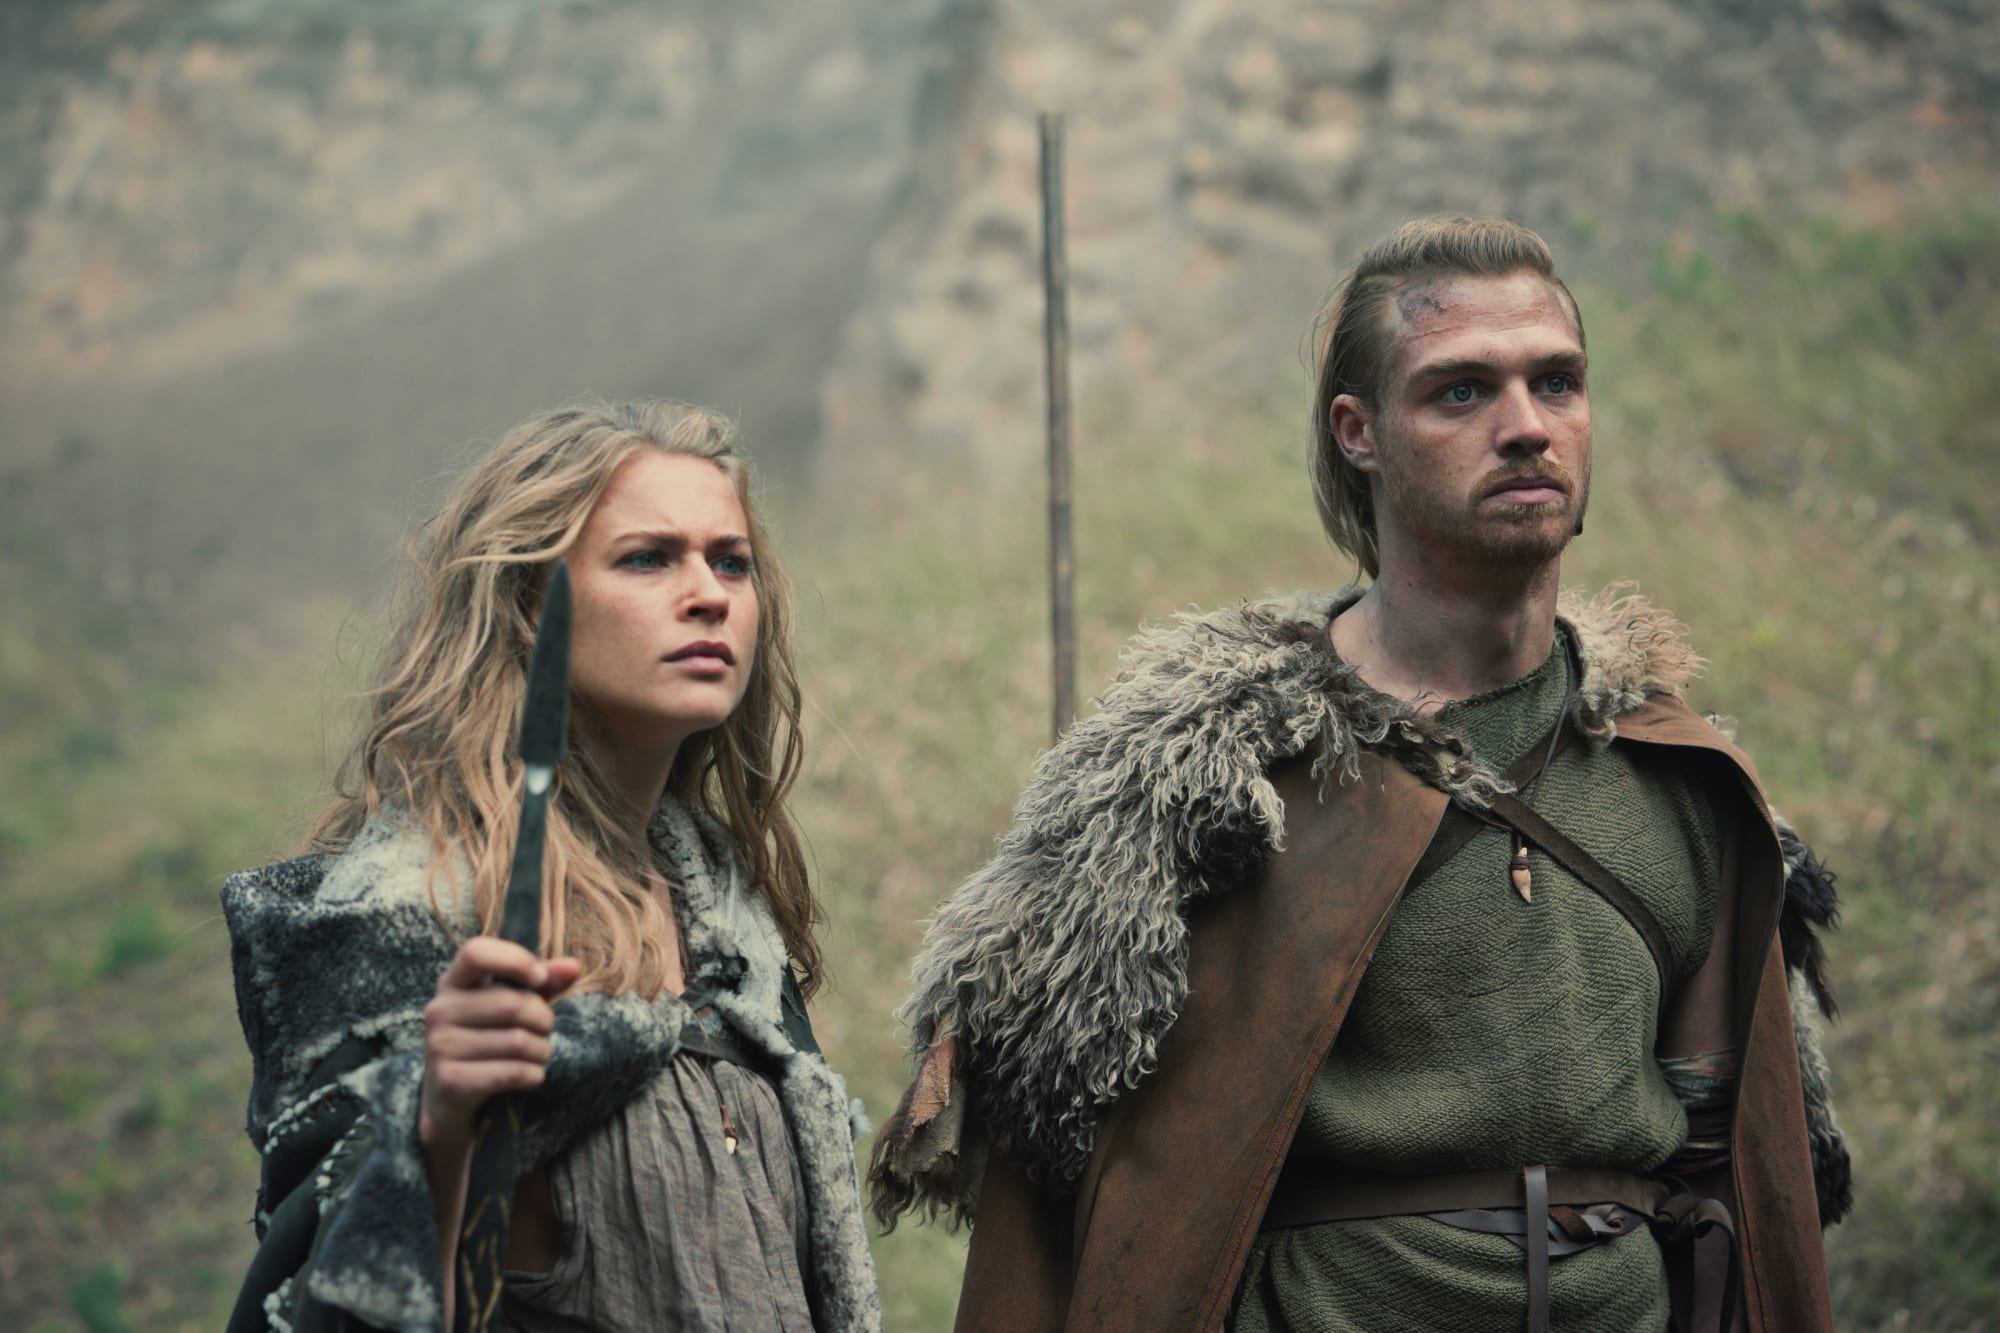 ‘Barbarians’ Season 2: Netflix Fall 2022 Release Date Confirmed & What to Expect